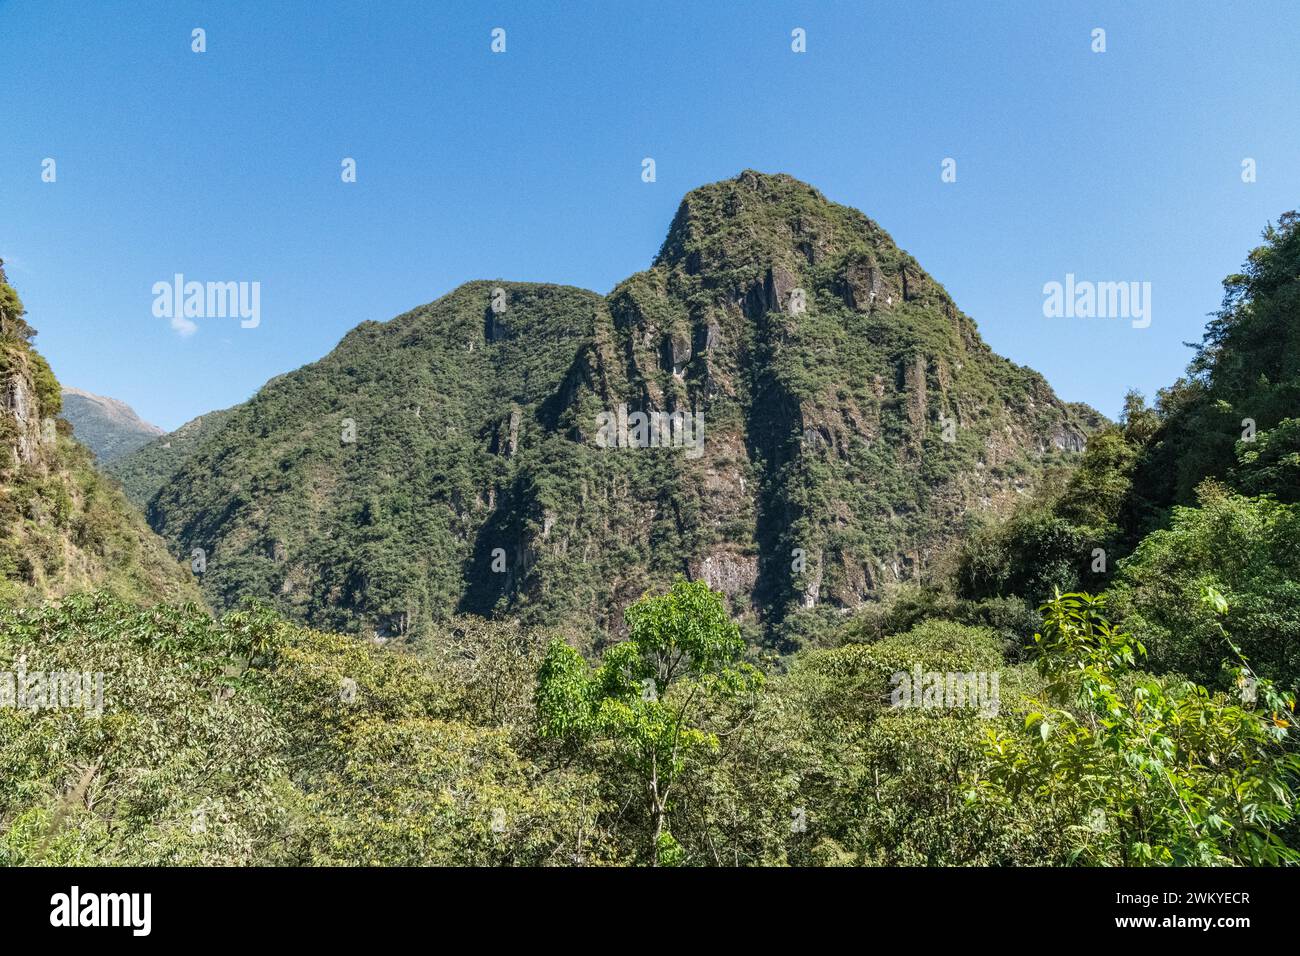 A view of the forest mountain landscape in the Sacred Valley at Aguas Calientes in Peru Stock Photo